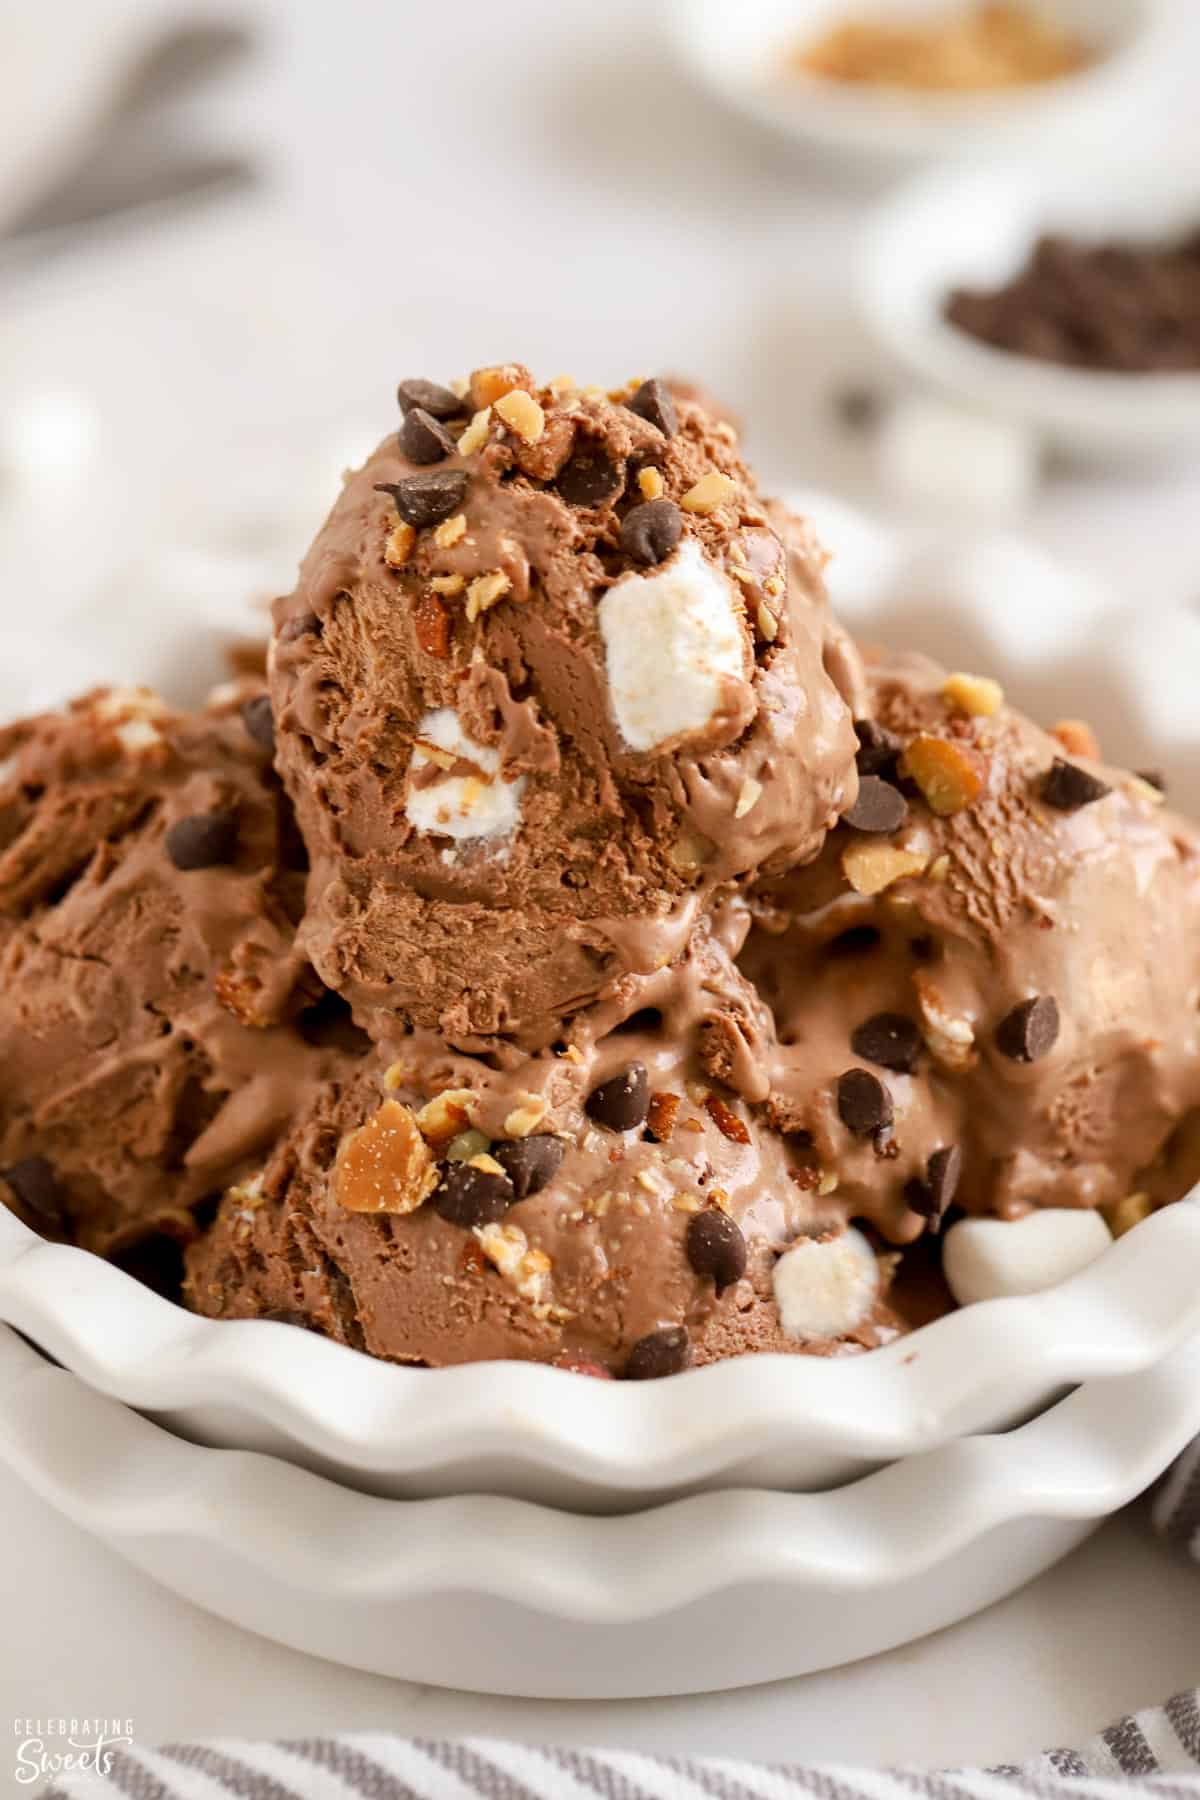 Closeup of white bowl filled with scoops of rocky road ice cream.